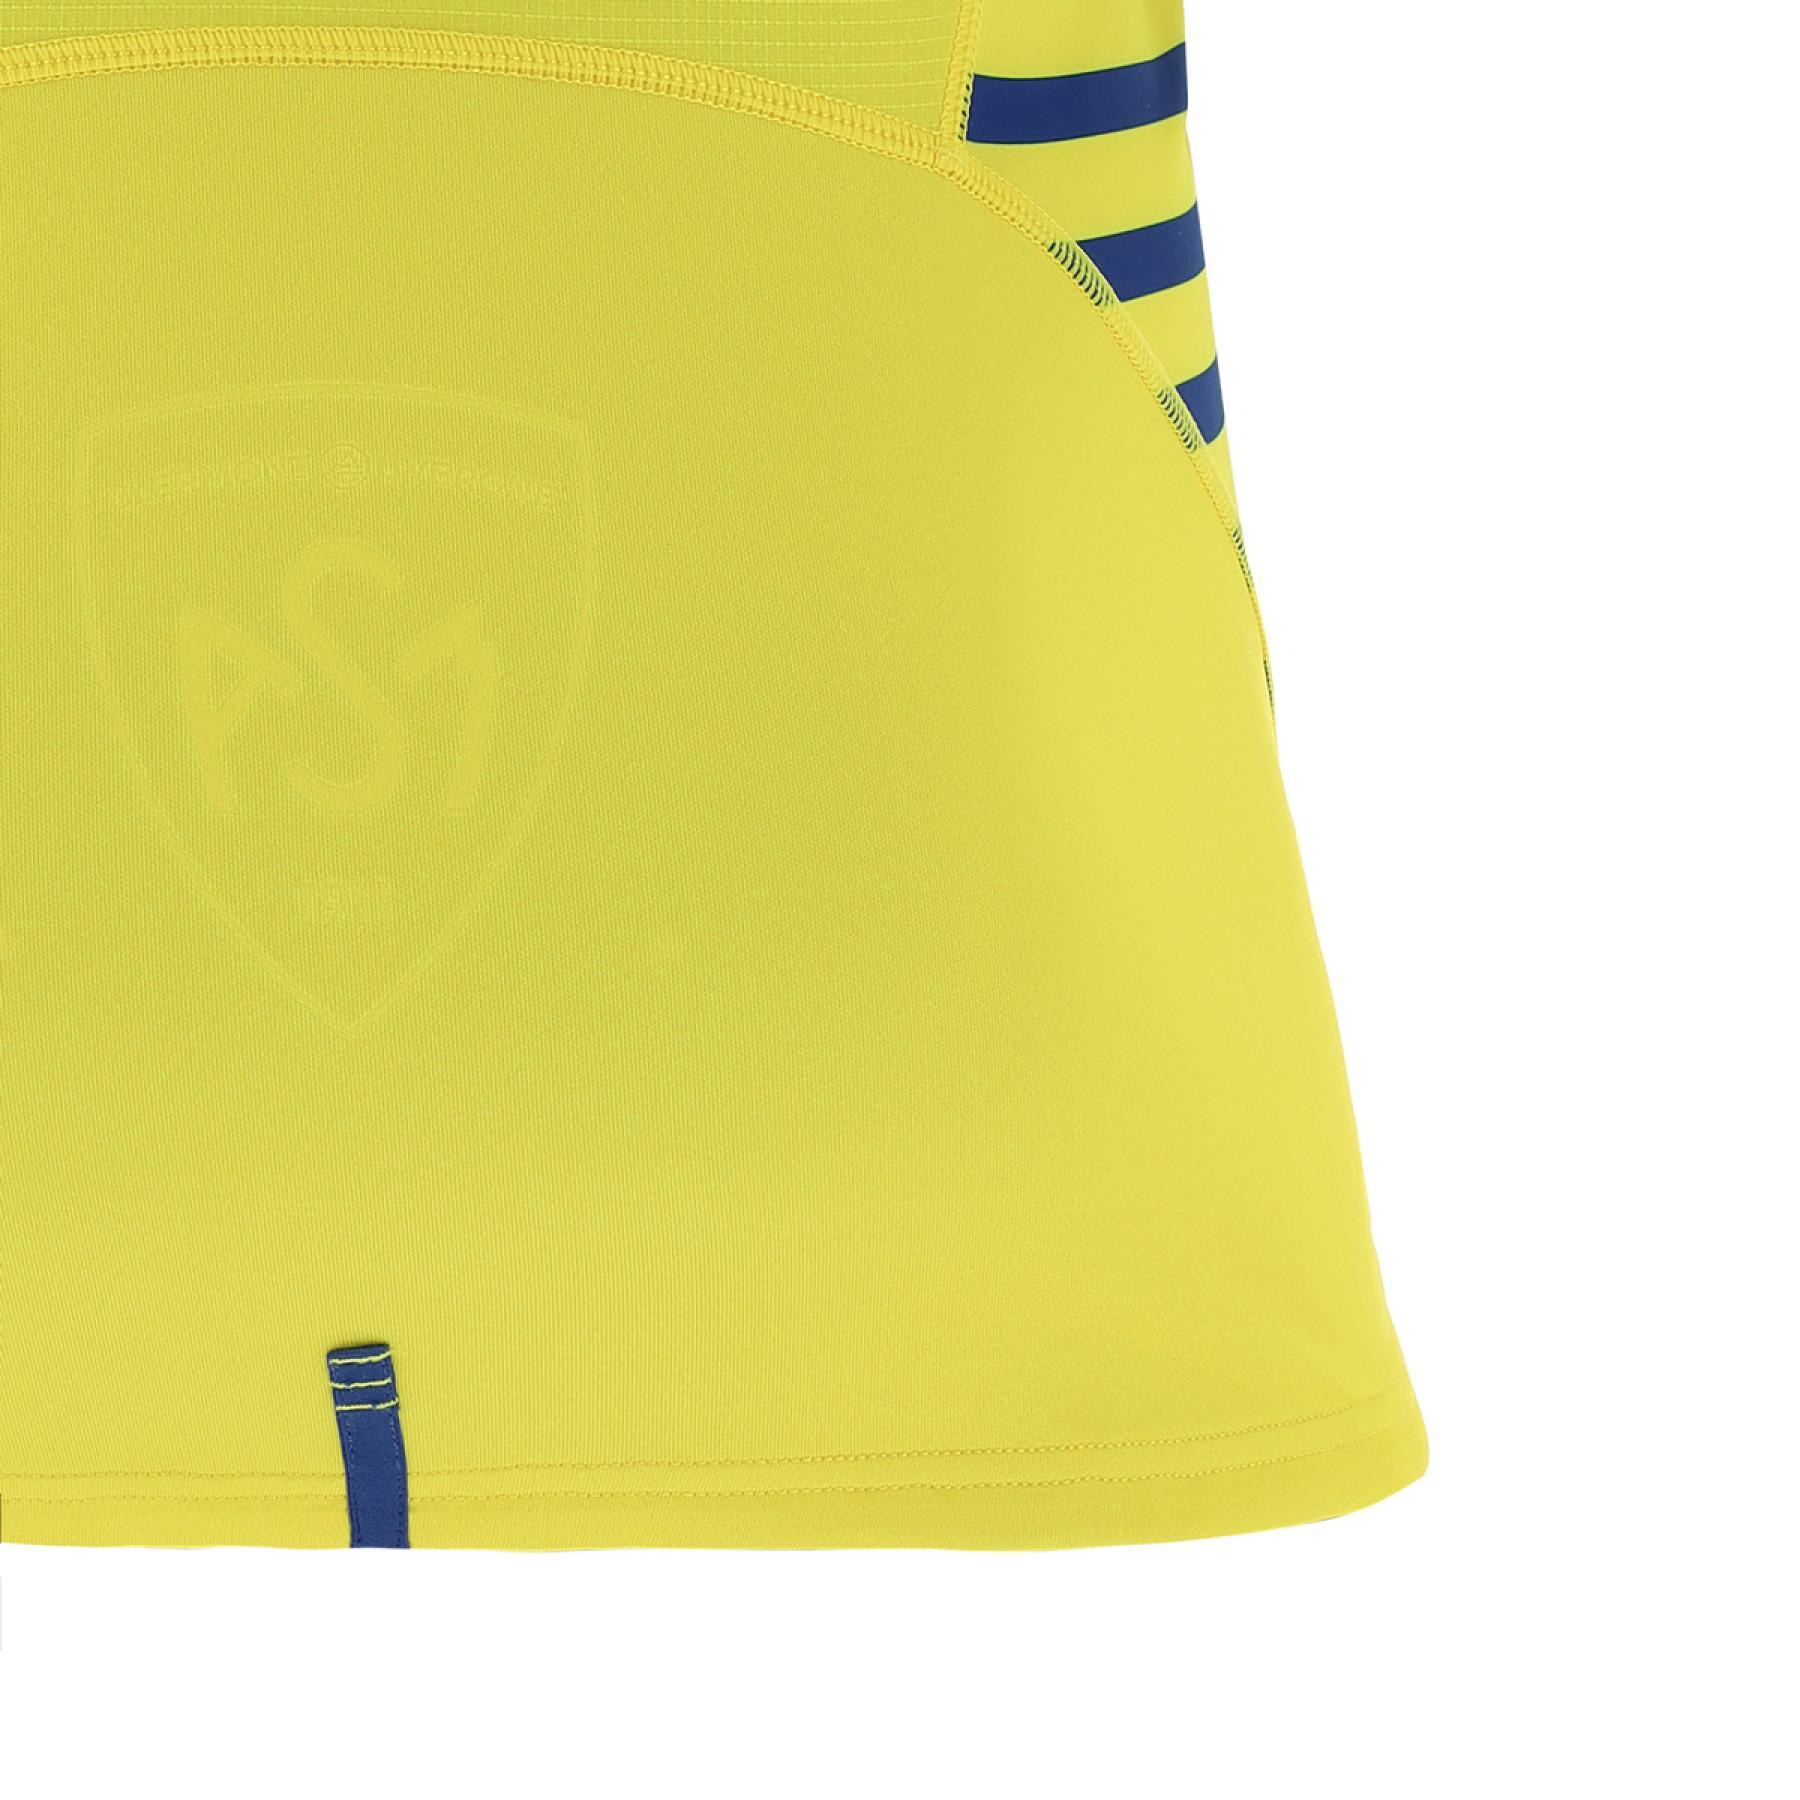 Clermont Auvergne home jersey 2020/21